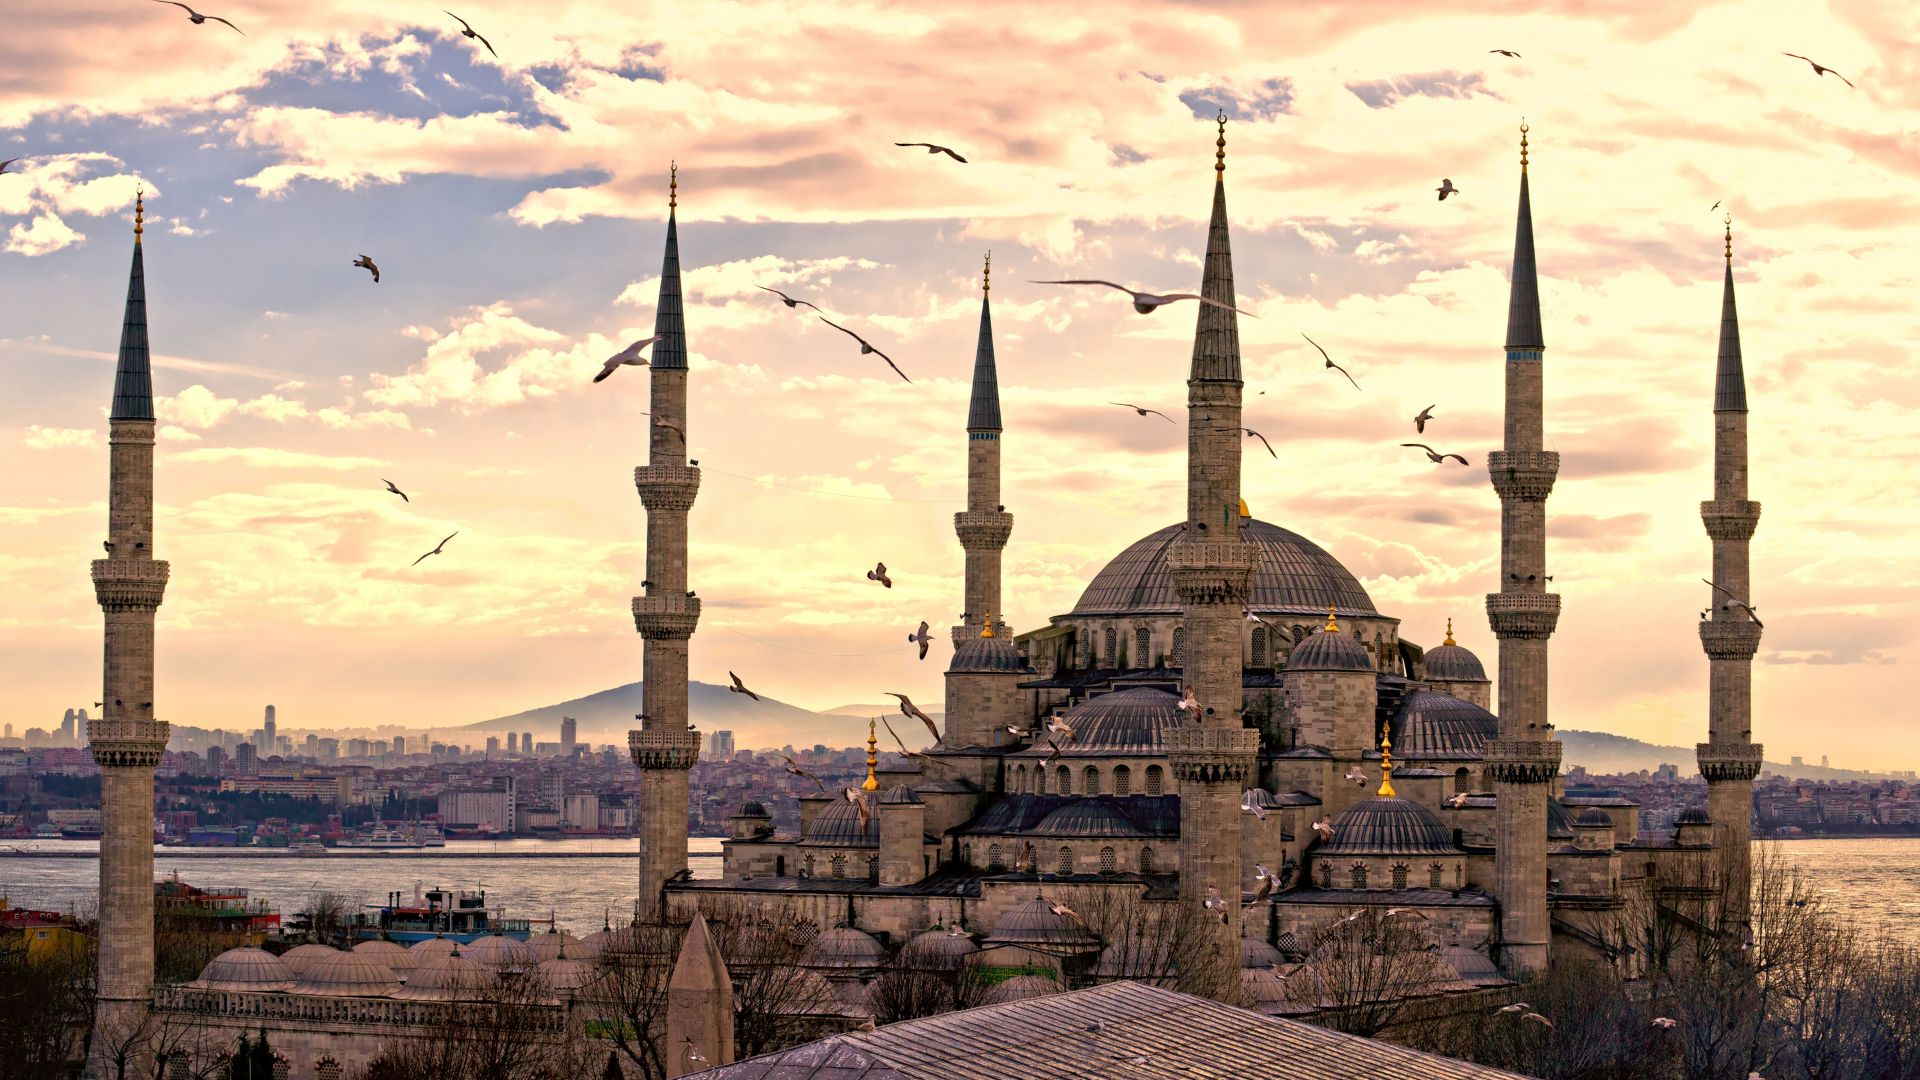 Sultan Ahmed Mosque, Istanbul, Turkey, Travel, Tourism (horizontal)